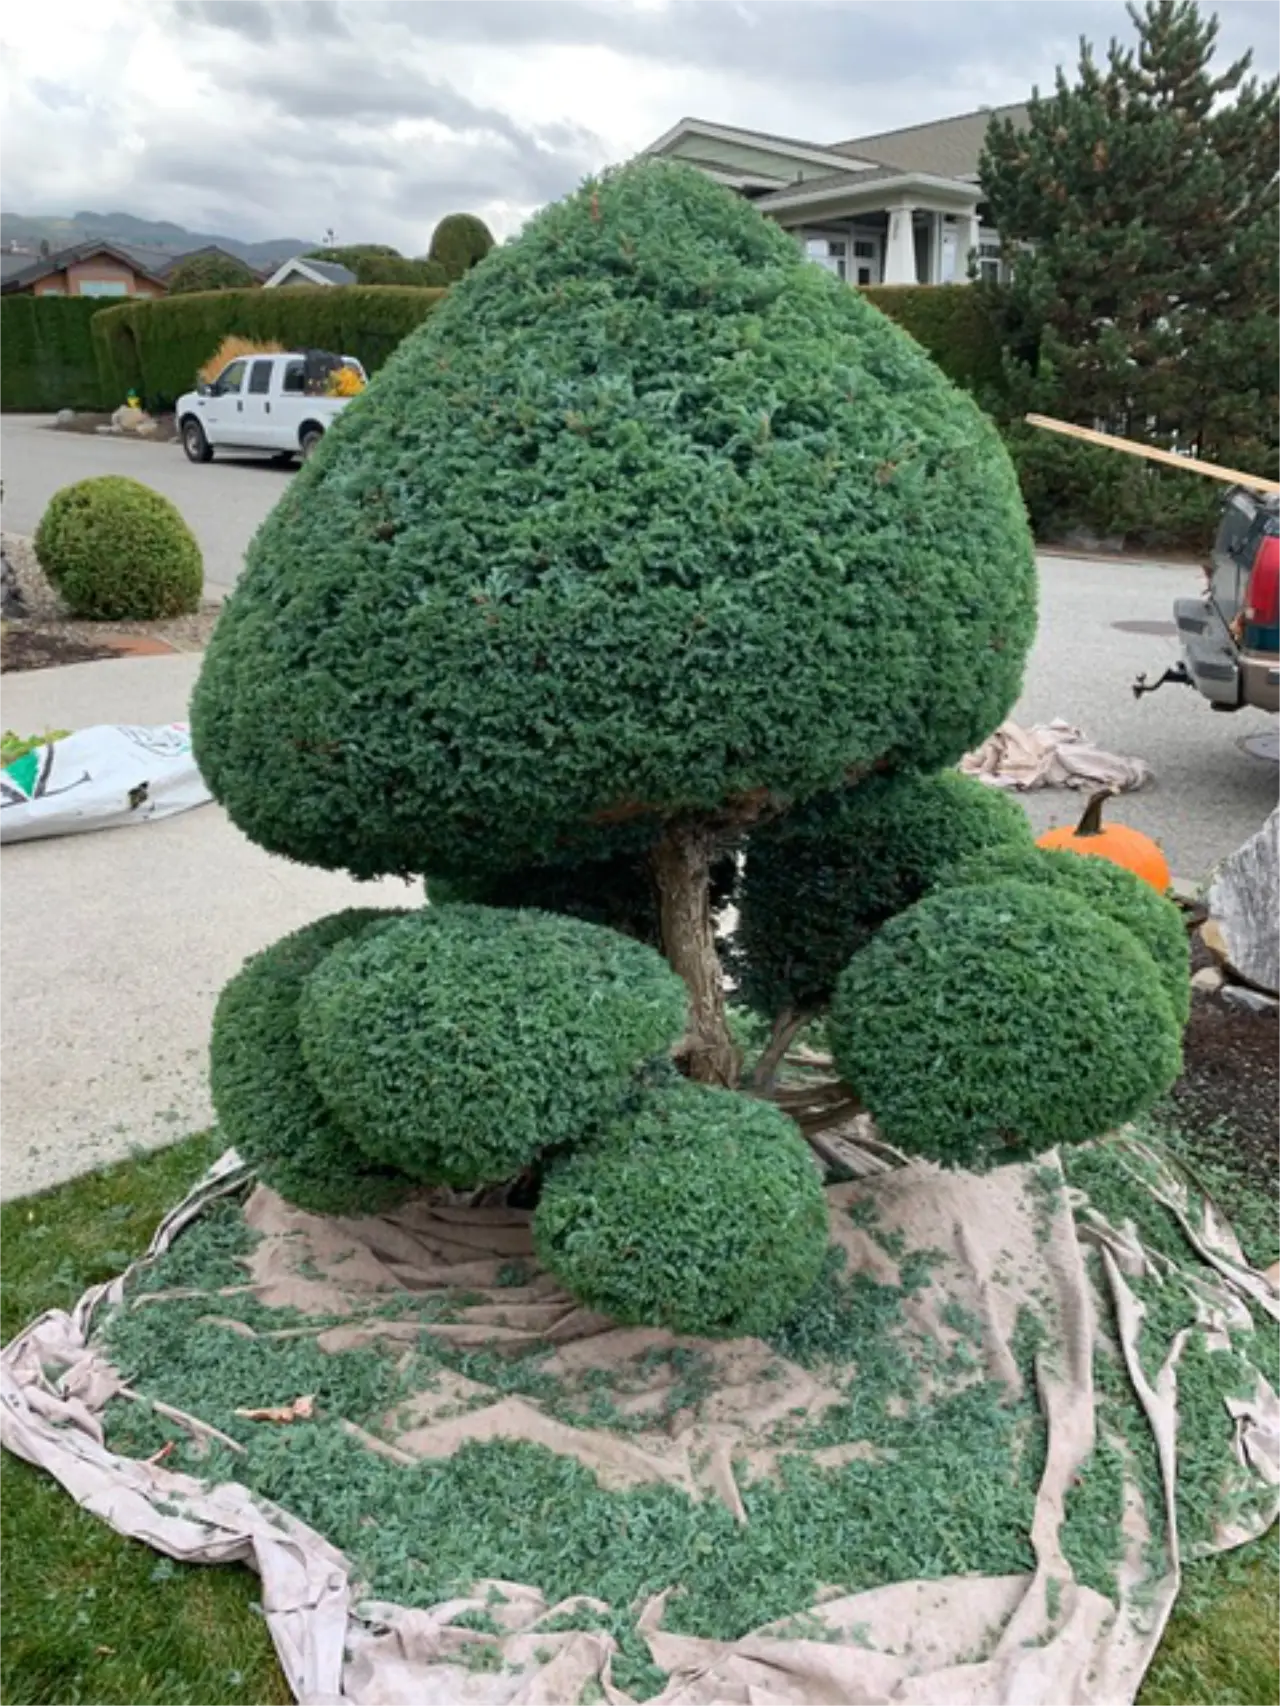 A topiary bush trimmed to resemble a large mushroom, with smaller rounded shapes at its base, all on a tarp-covered ground, against a backdrop of a residential street and houses.